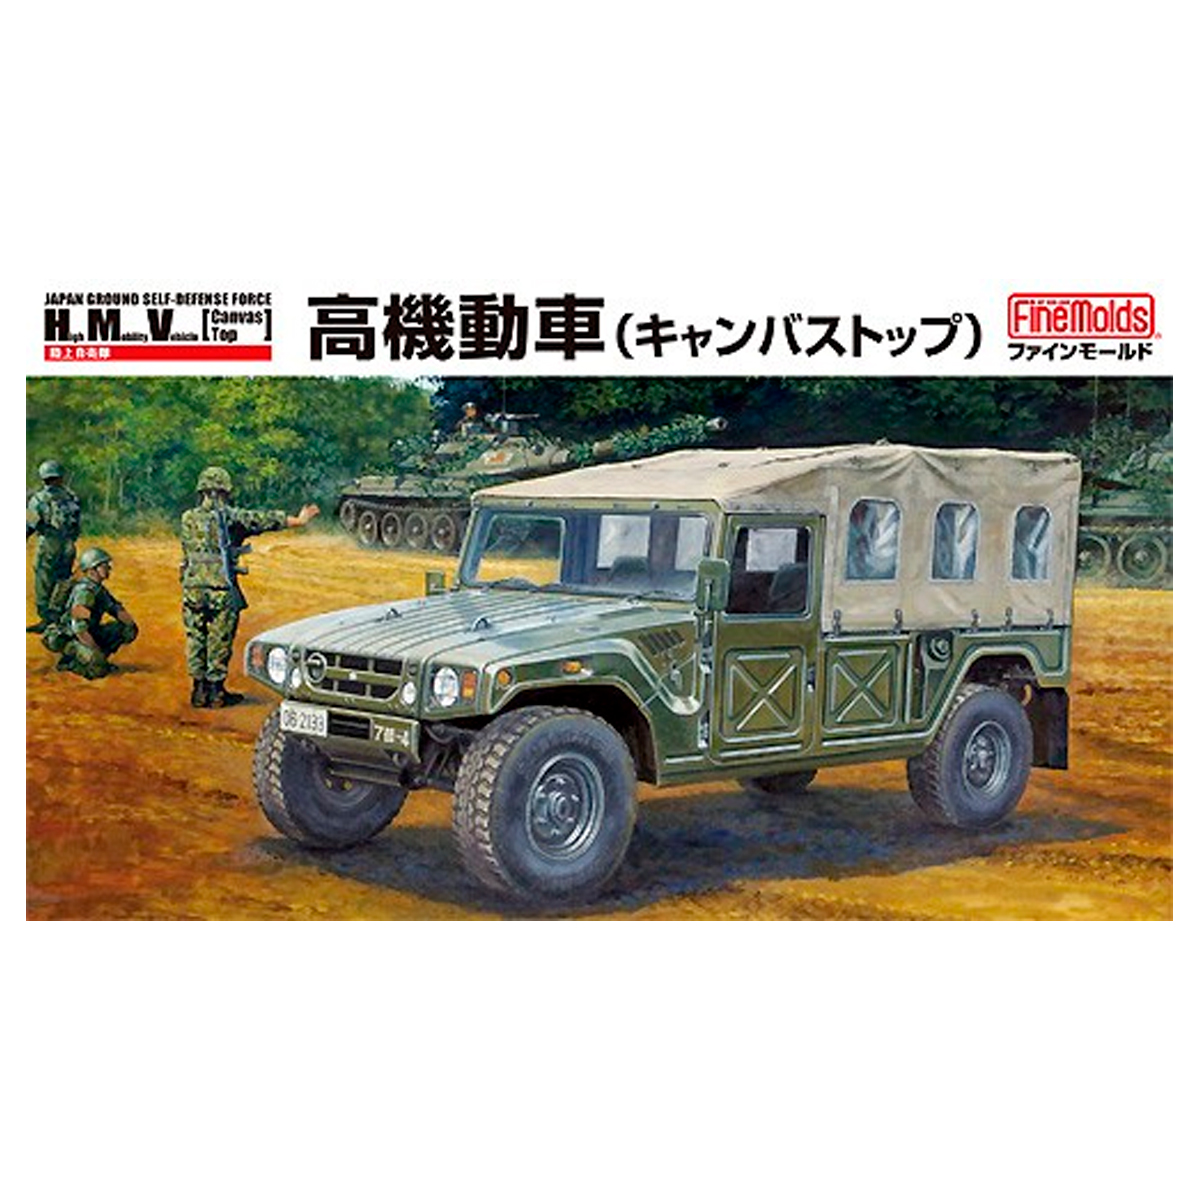 JGSDF High Mobility Vehicle w/ Canvas Top 1/35